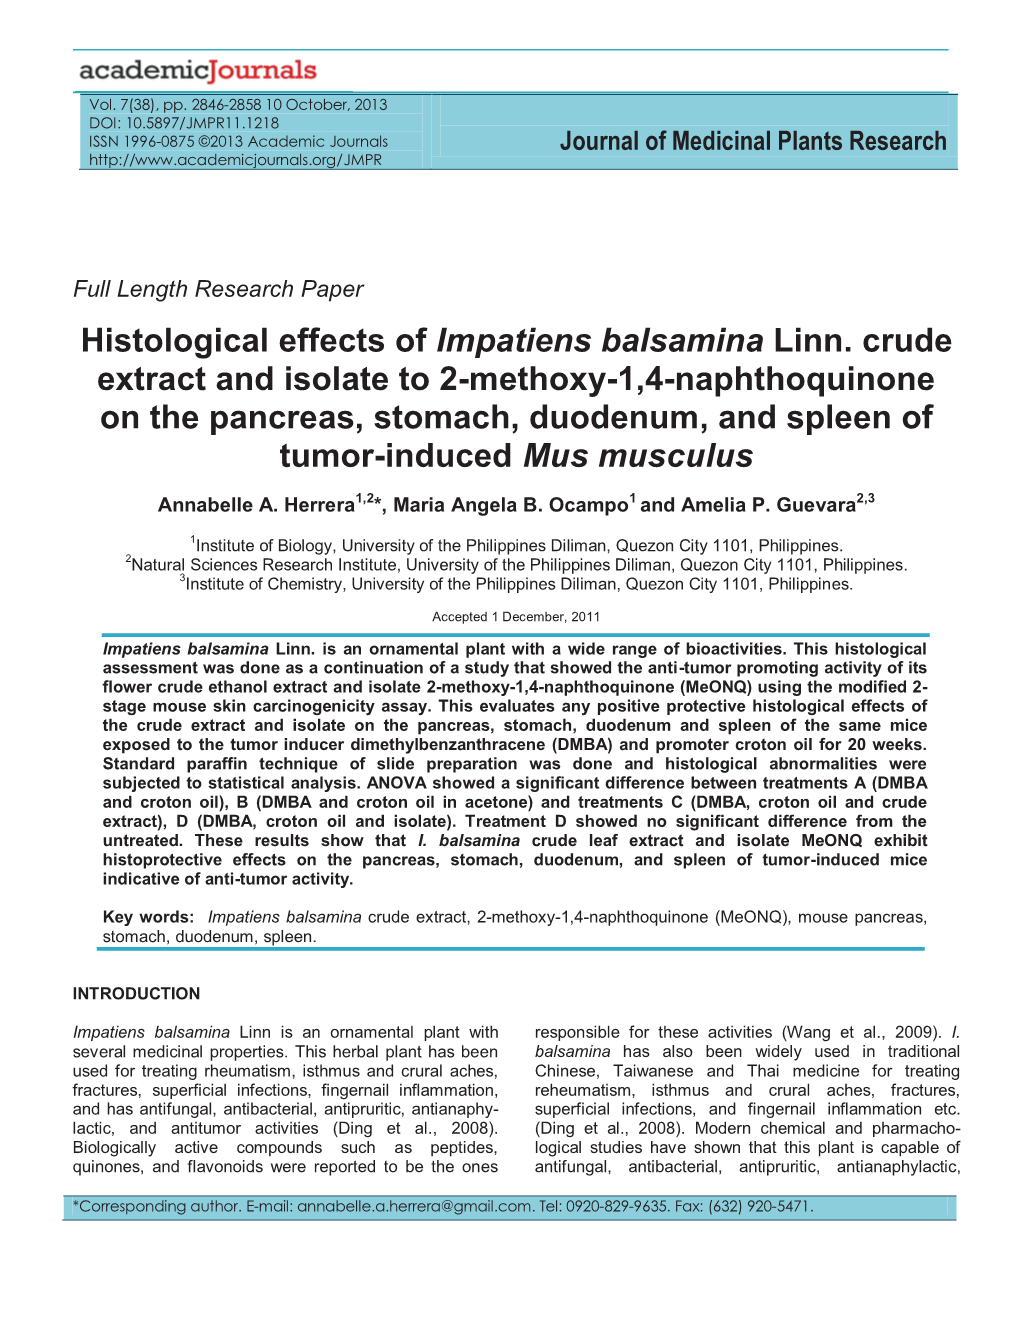 Histological Effects of Impatiens Balsamina Linn. Crude Extract And